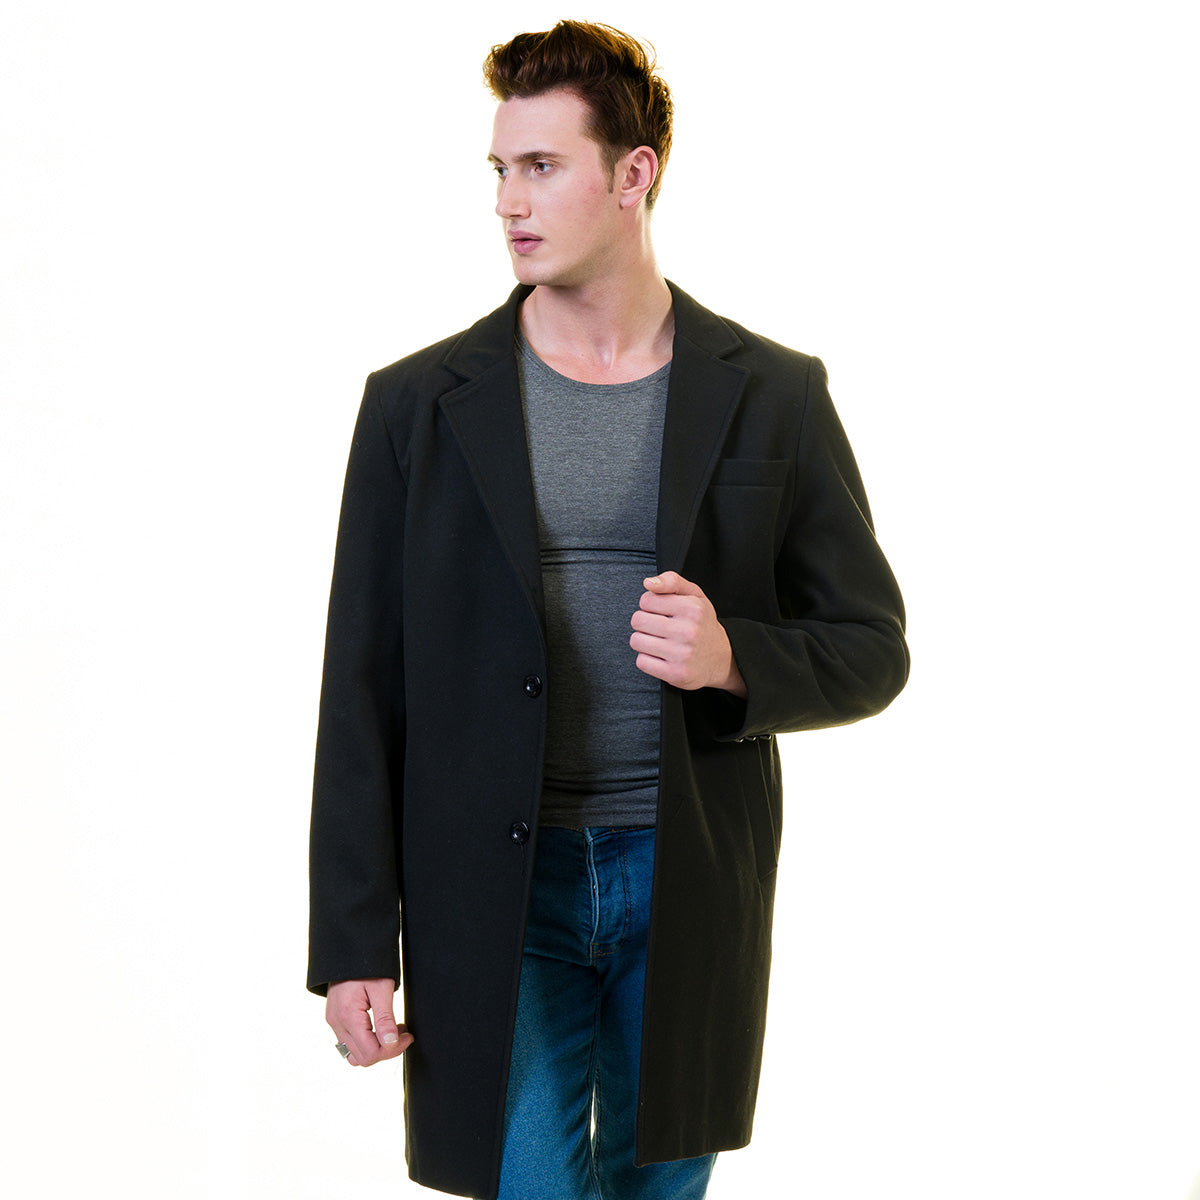 Men's European Black Wool Coat Hooded Jacket Tailor fit Fine Luxury Quality Work and Casual